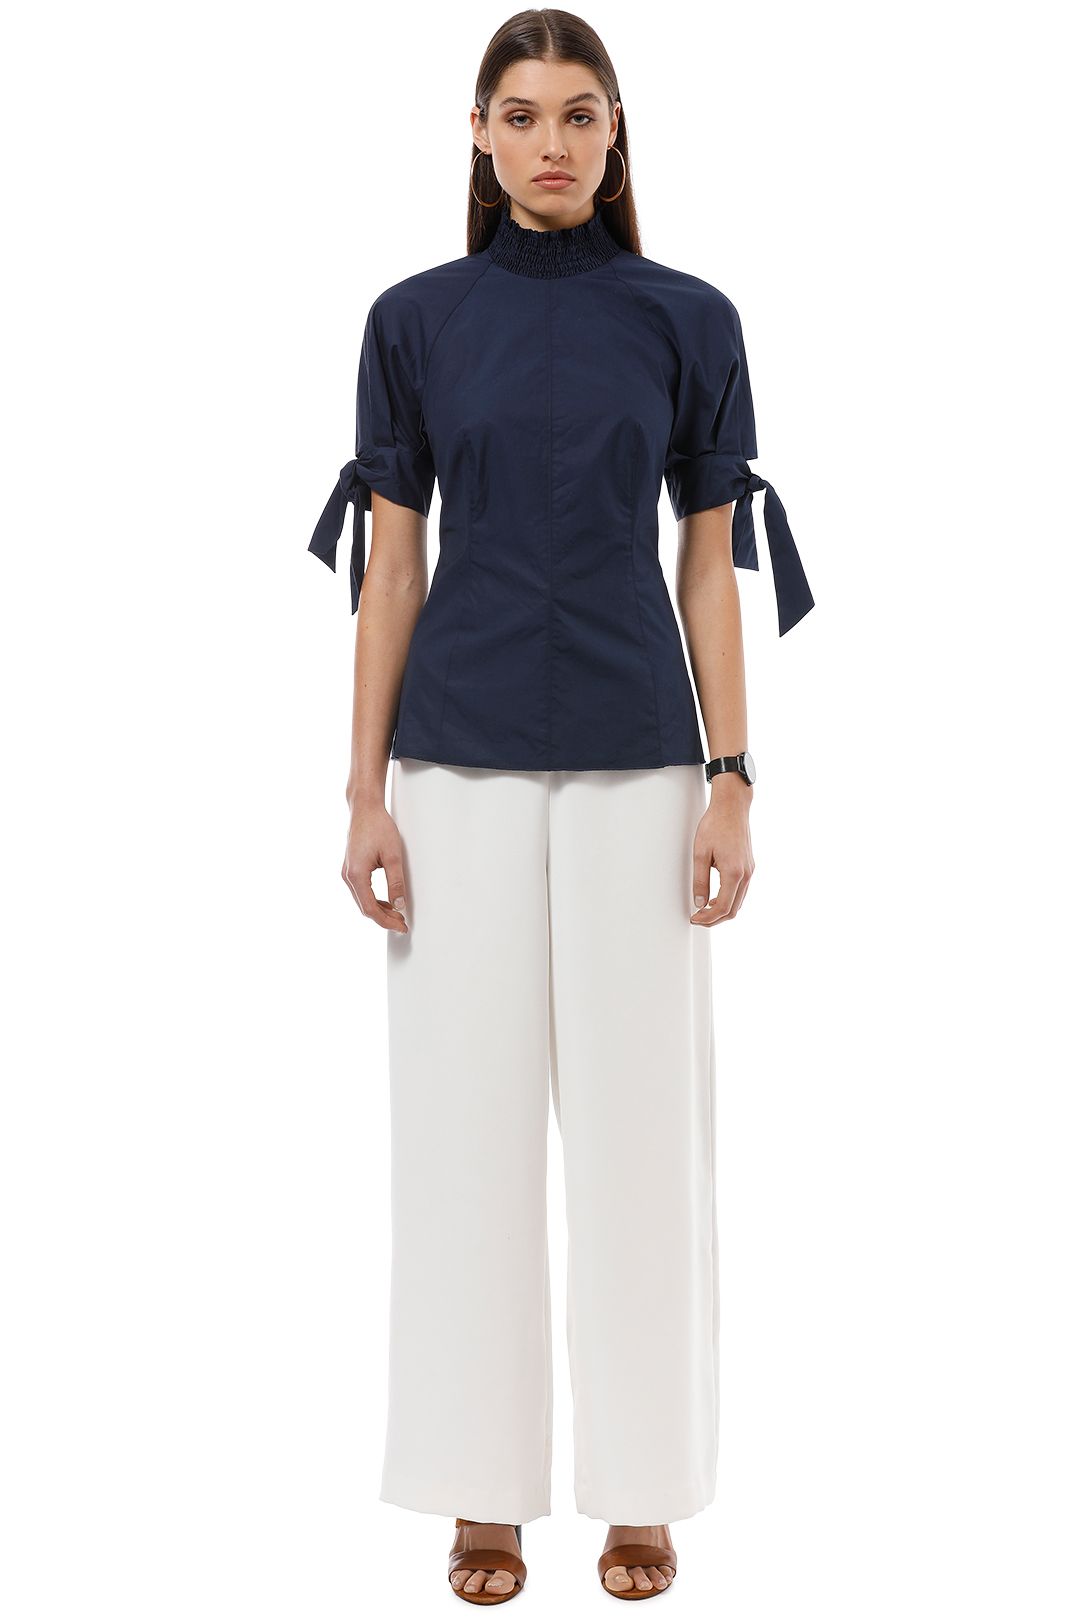 Camilla and Marc - Giralda Top - Blue - Front